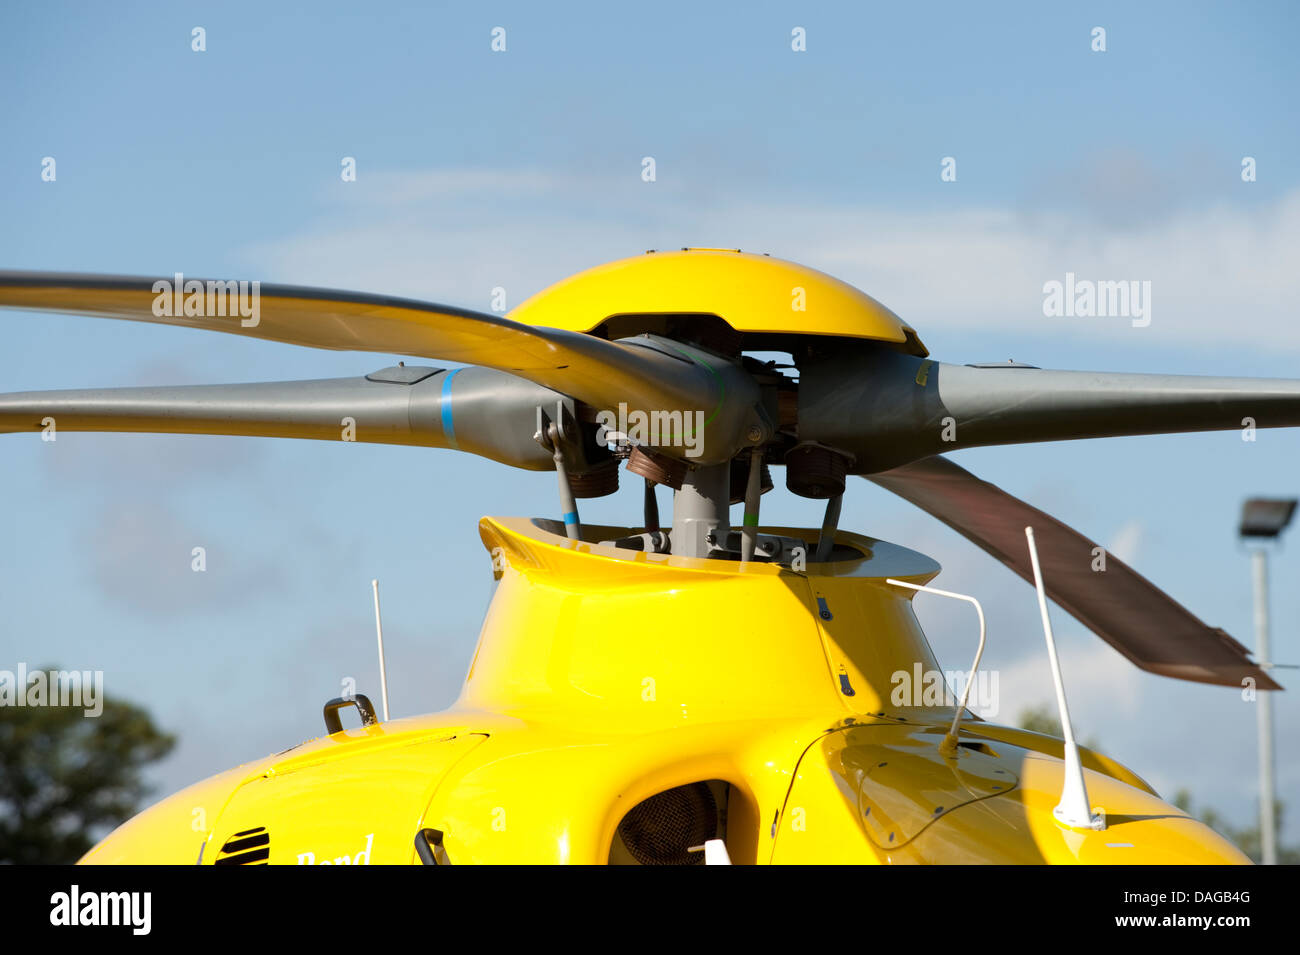 Air Ambulance Helicopter Rotor Hub Detail Stock Photo